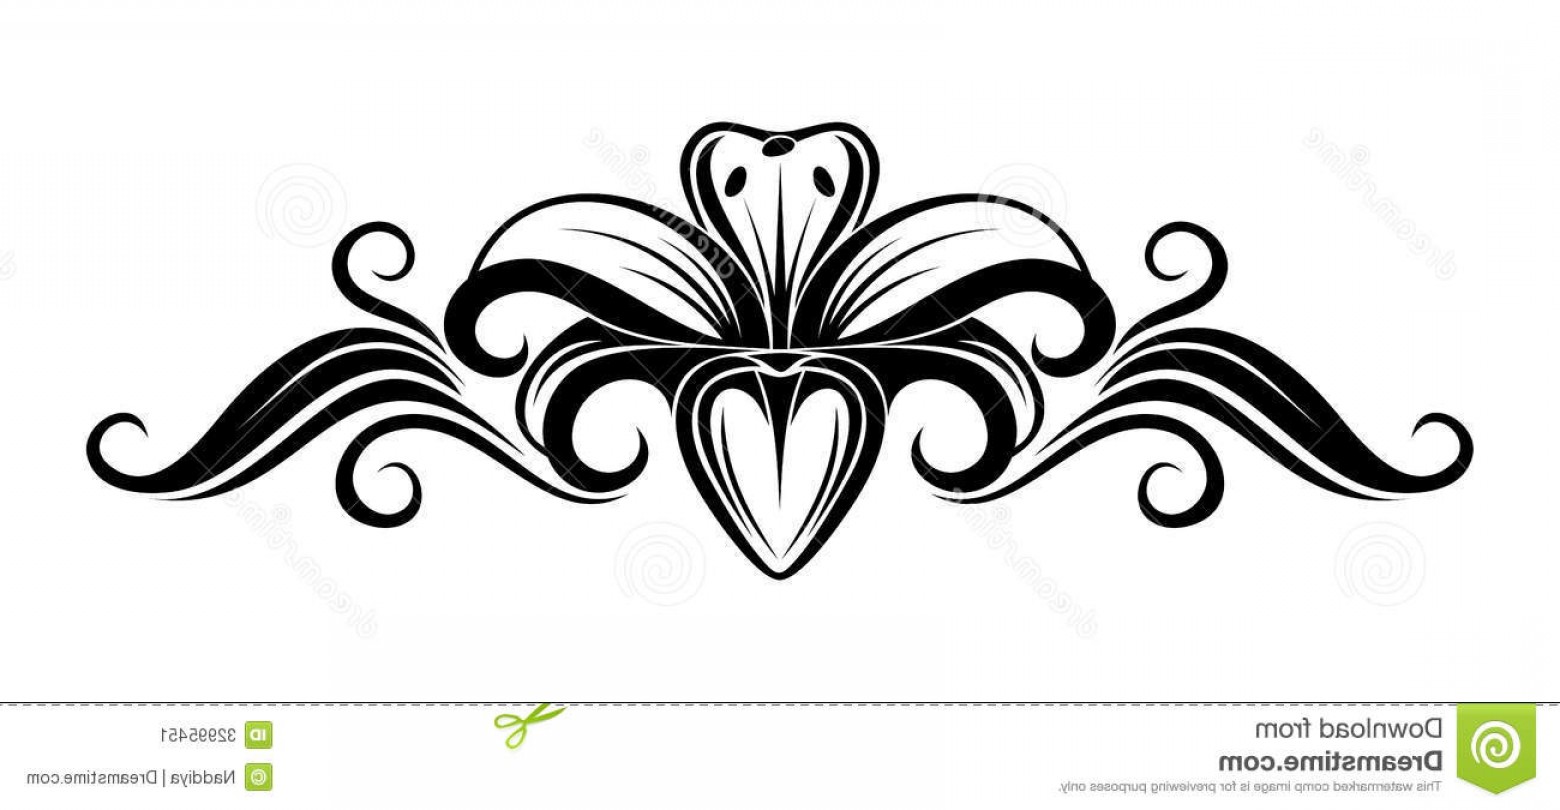 Lily Flower Clipart Black And White